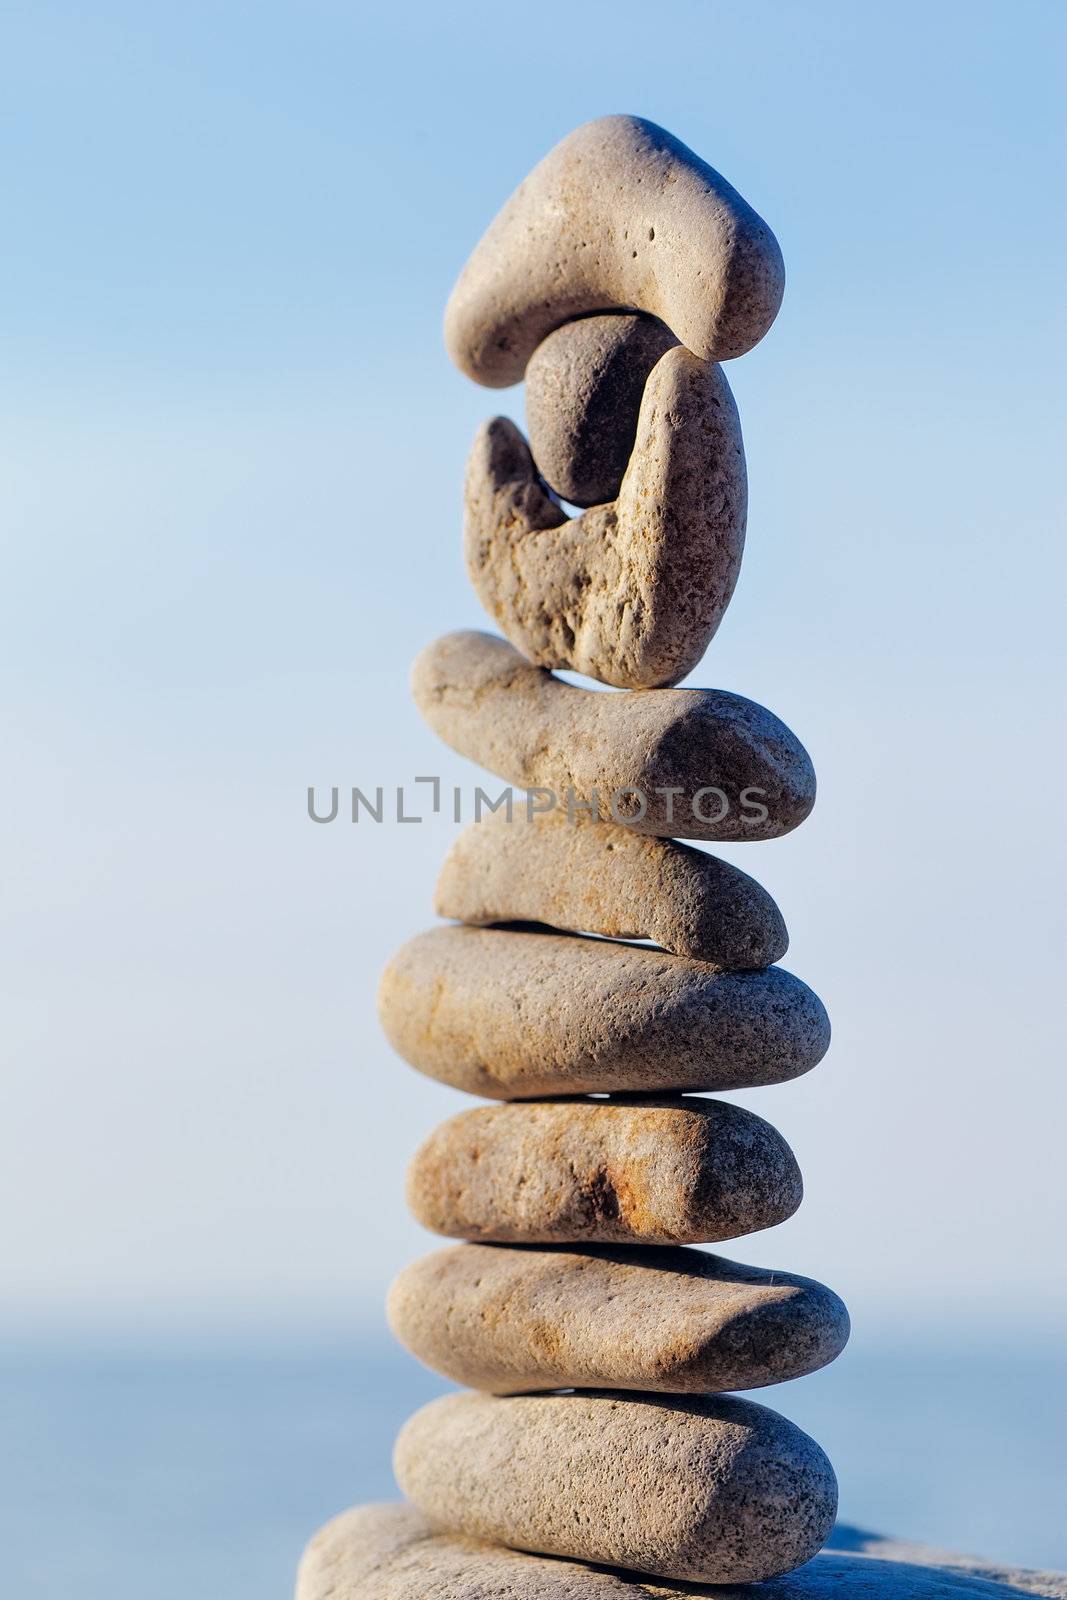 Balancing of pebbles each other on a sky background